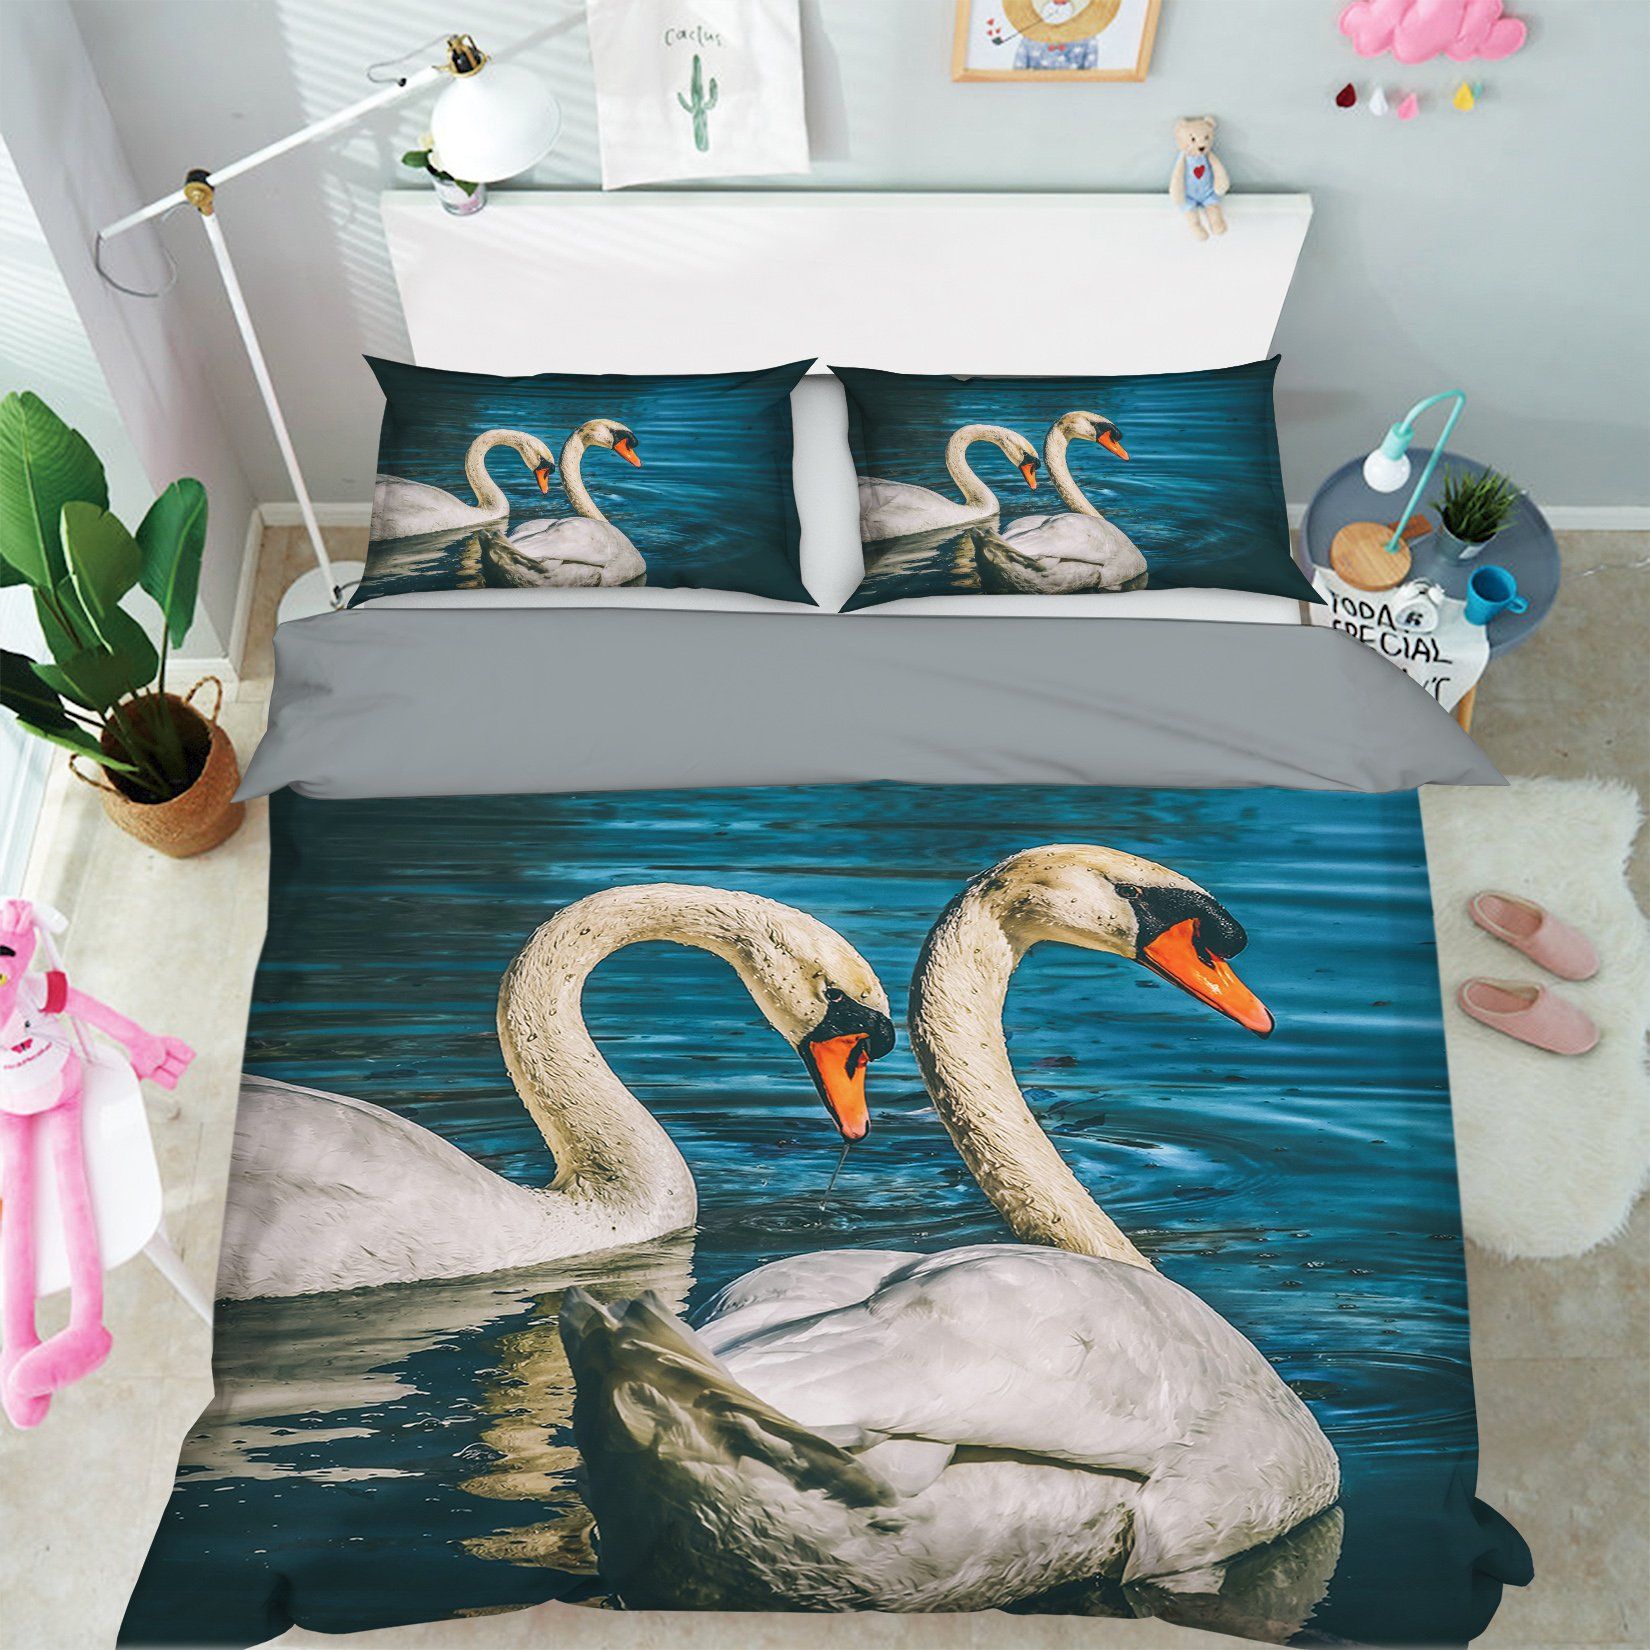 3D Goose Swimming 1998 Bed Pillowcases Quilt Quiet Covers AJ Creativity Home 